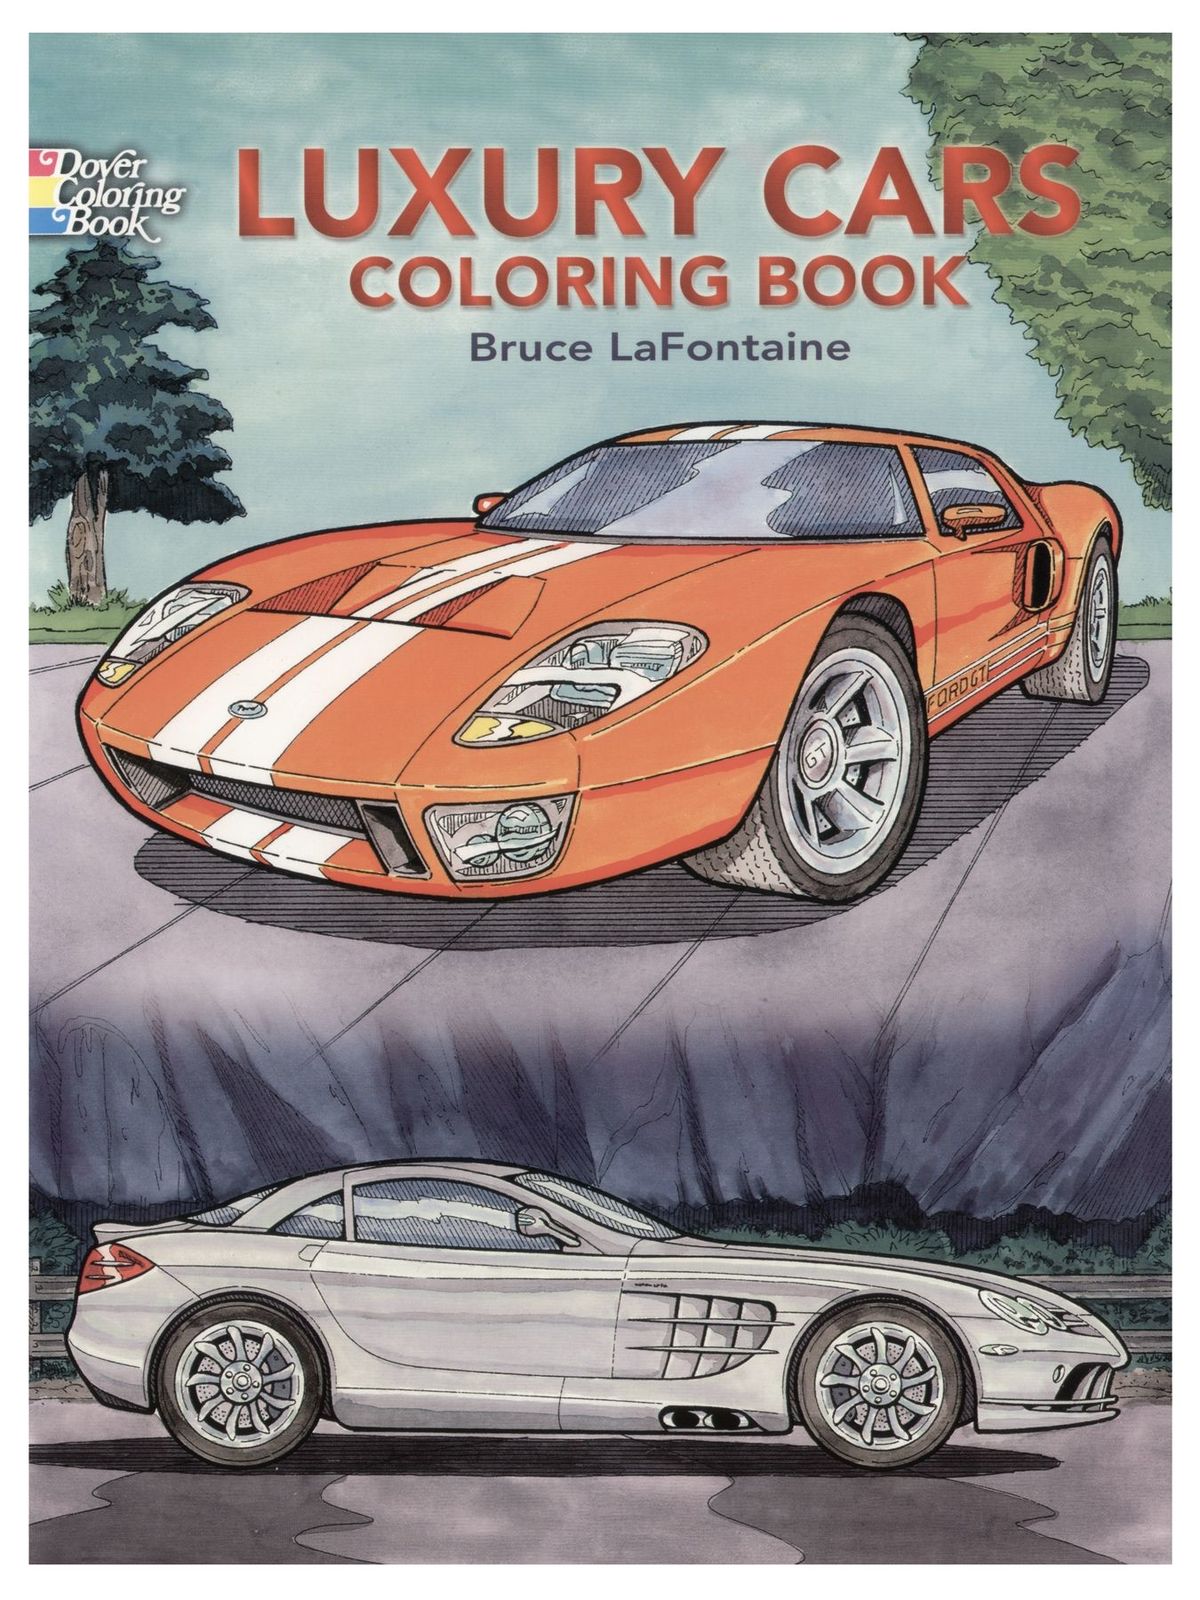 Luxury Cars Coloring Book Luxury Cars Coloring Book